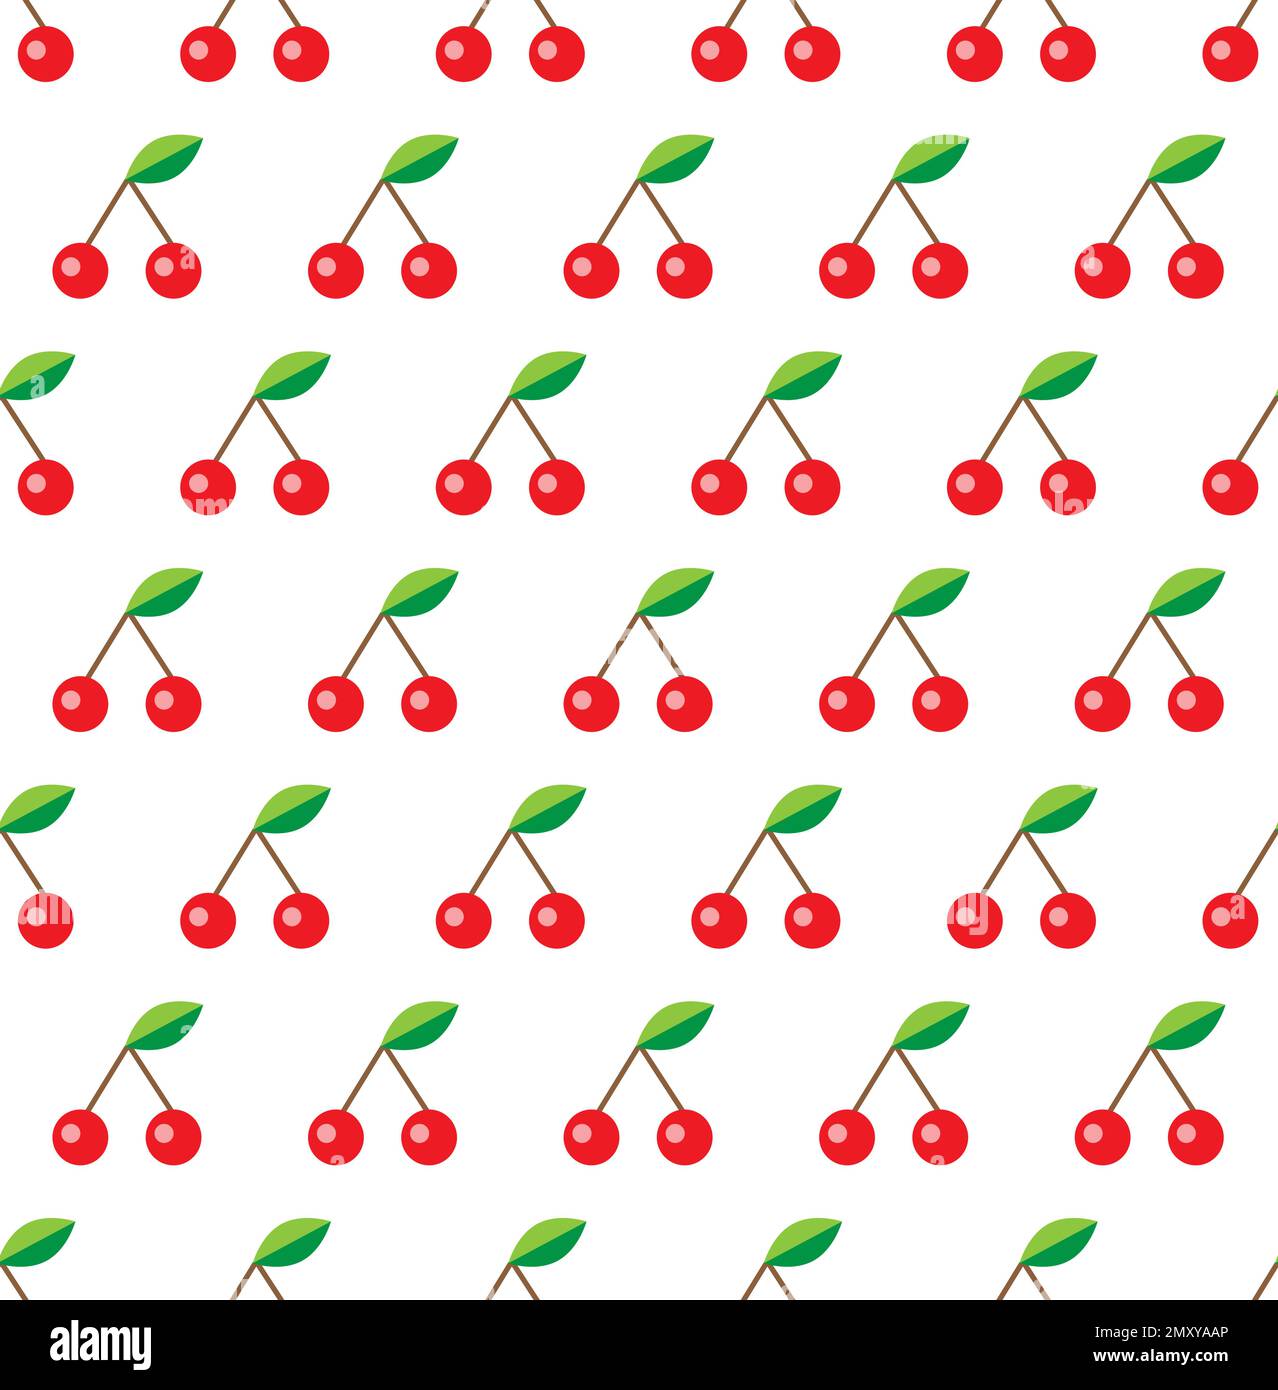 seamless pattern with cherries design illustration eps Stock Vector